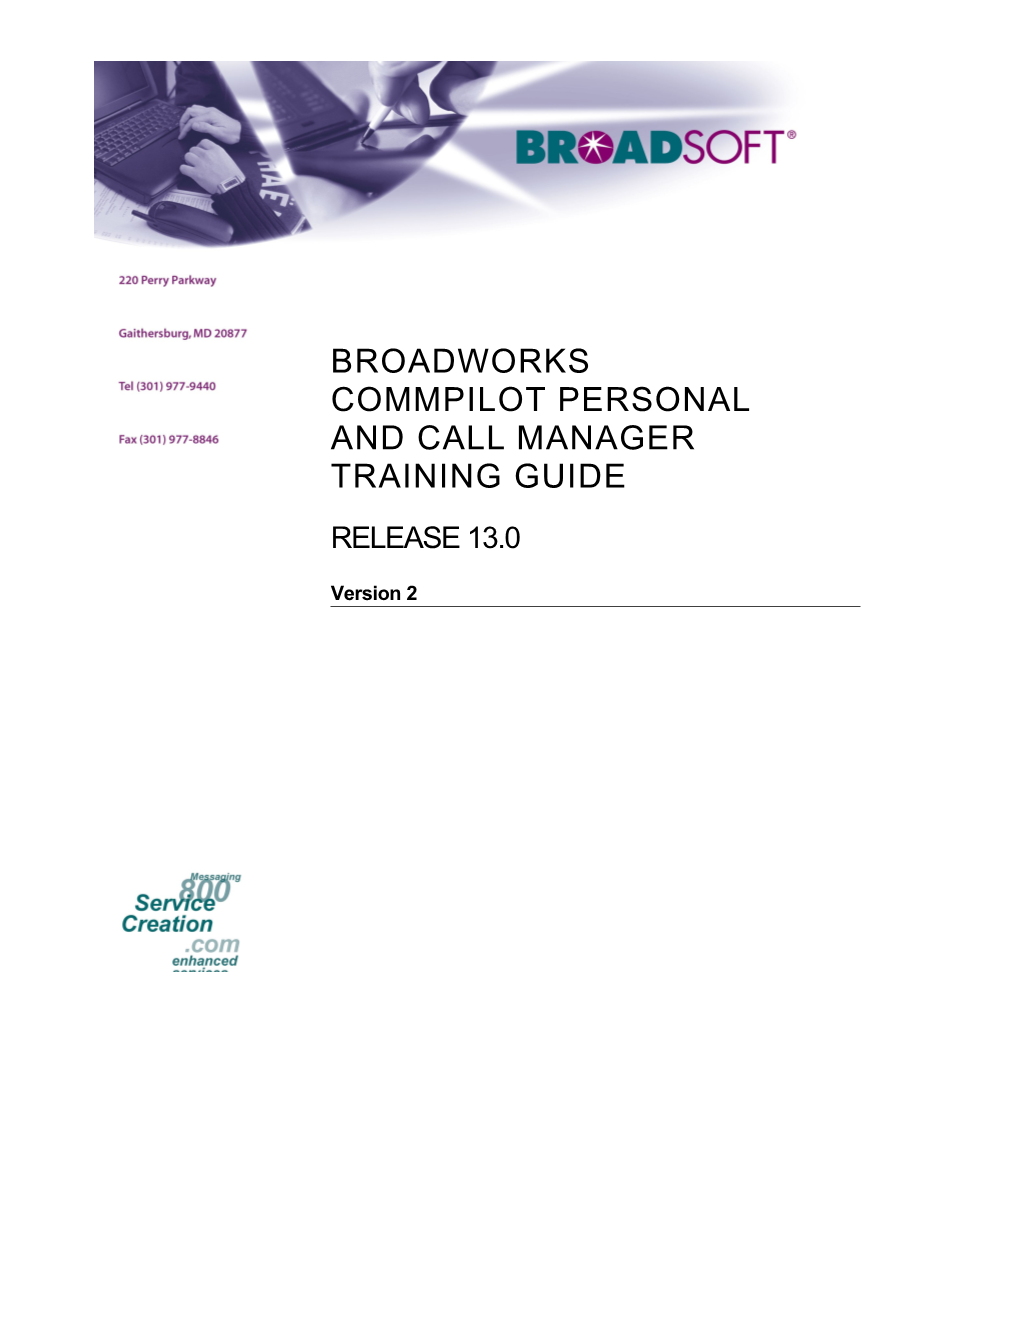 Broadworks Commpilot Personal and Call Manager Training Guide